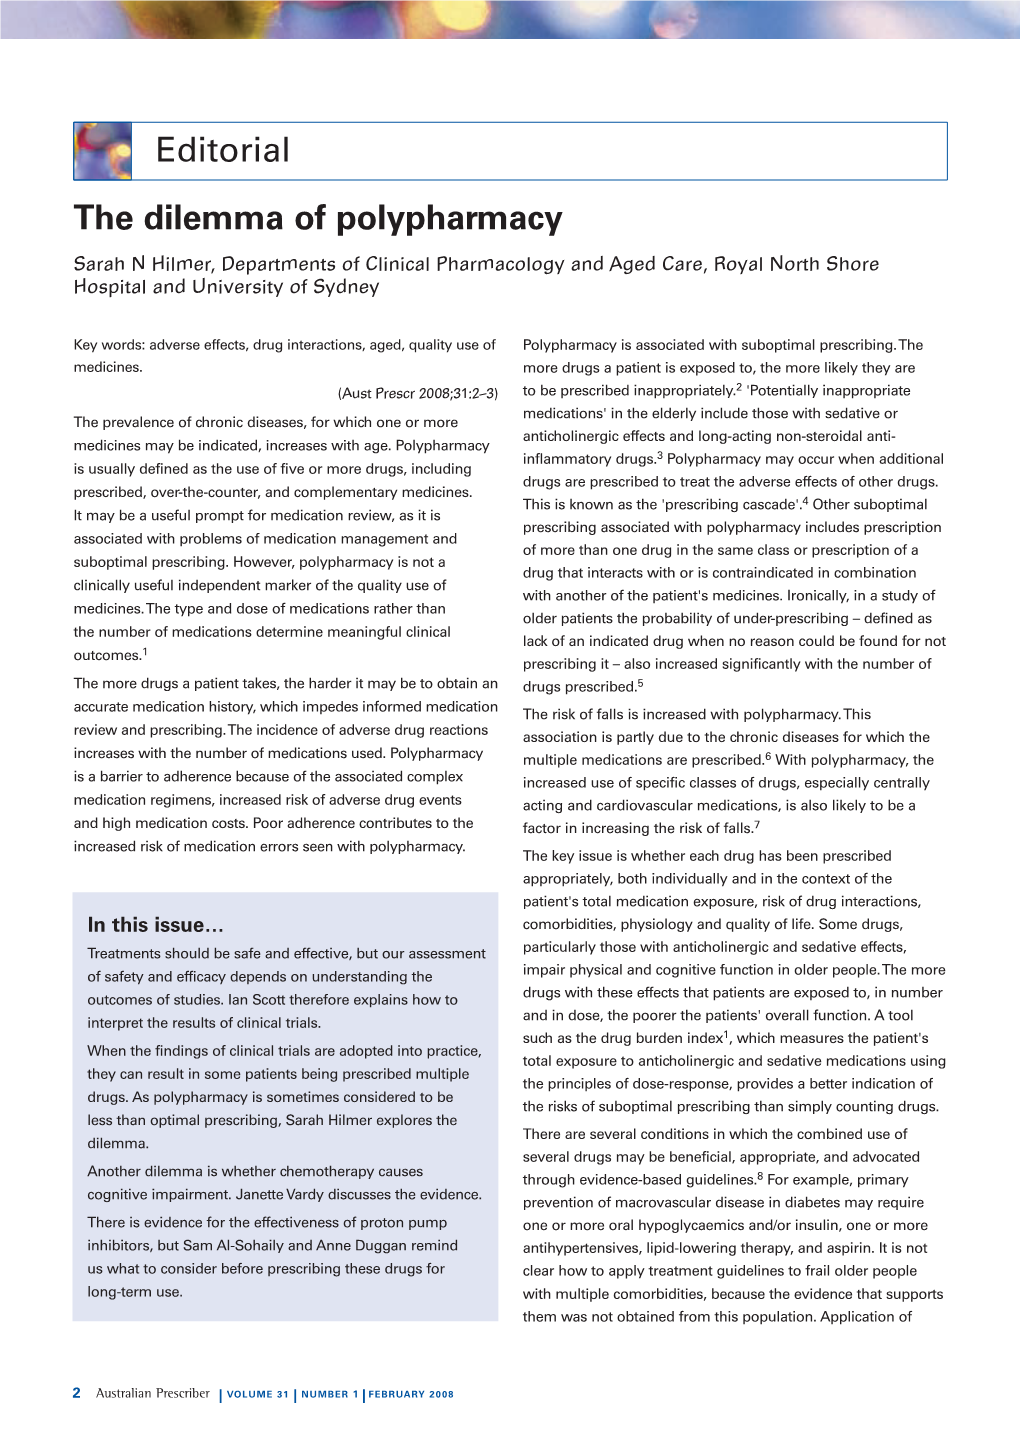 Editorial the Dilemma of Polypharmacy